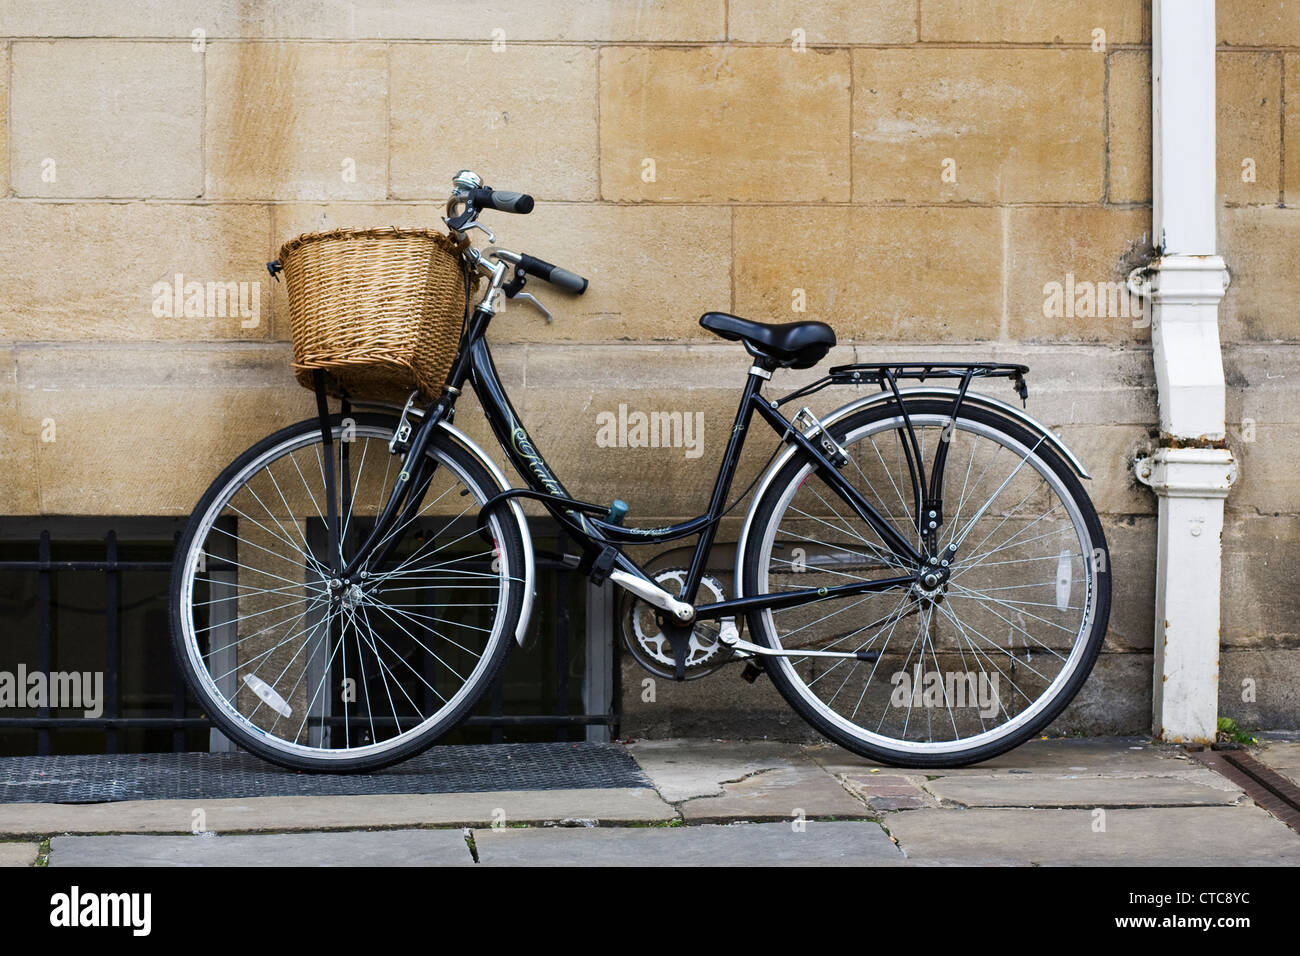 A Raleigh bicycle standing against a wall. Stock Photo